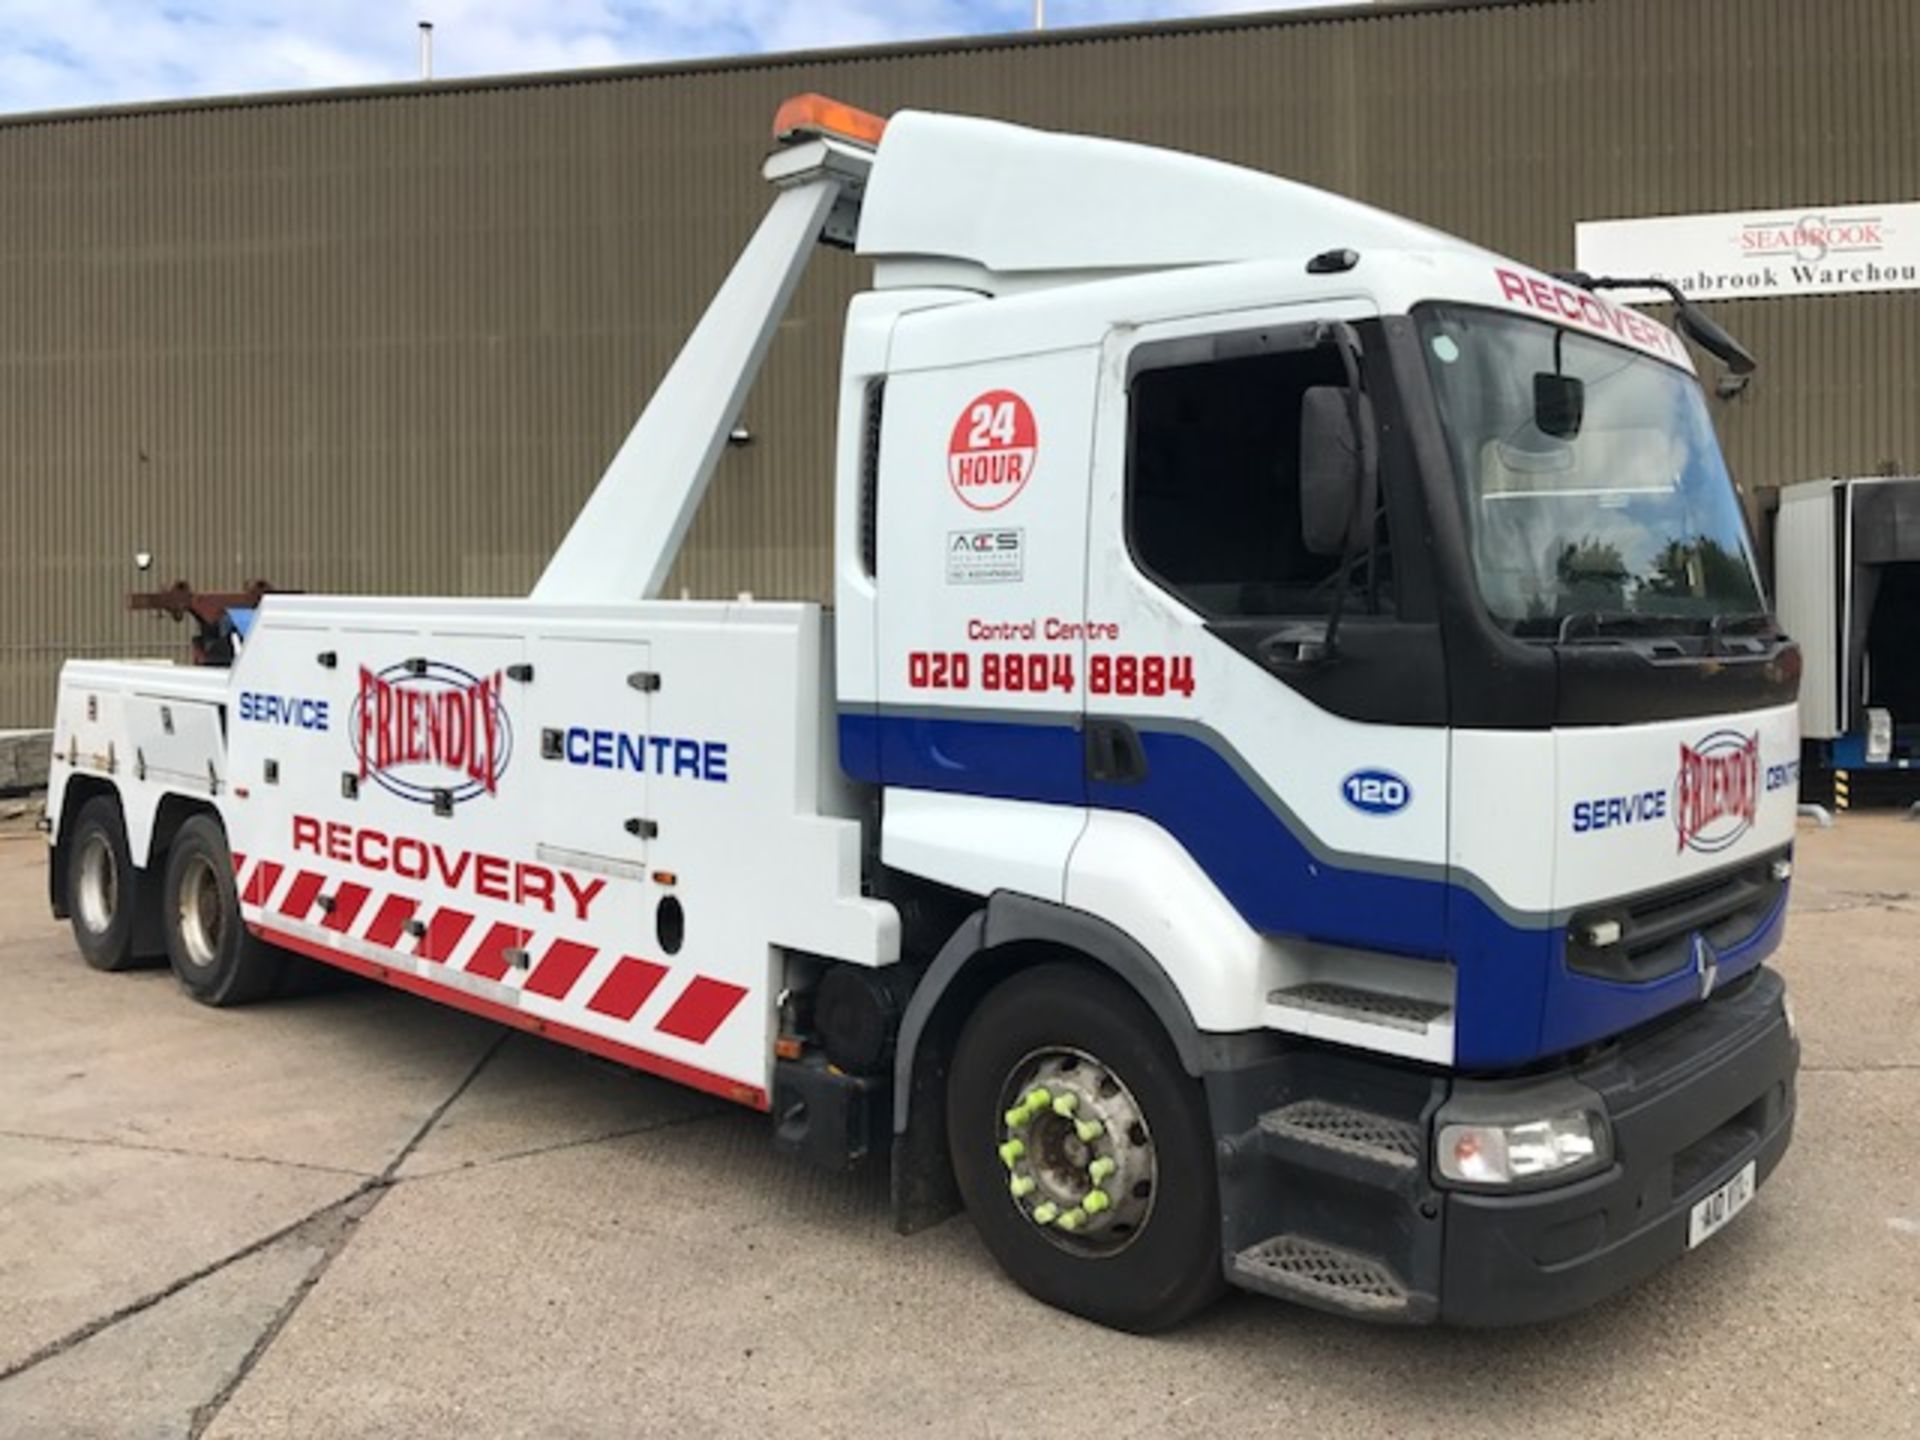 1997 Renault Premium 6/2 Tractor 26T sleeper cab breakdown recovery vehicle complete with Boniface